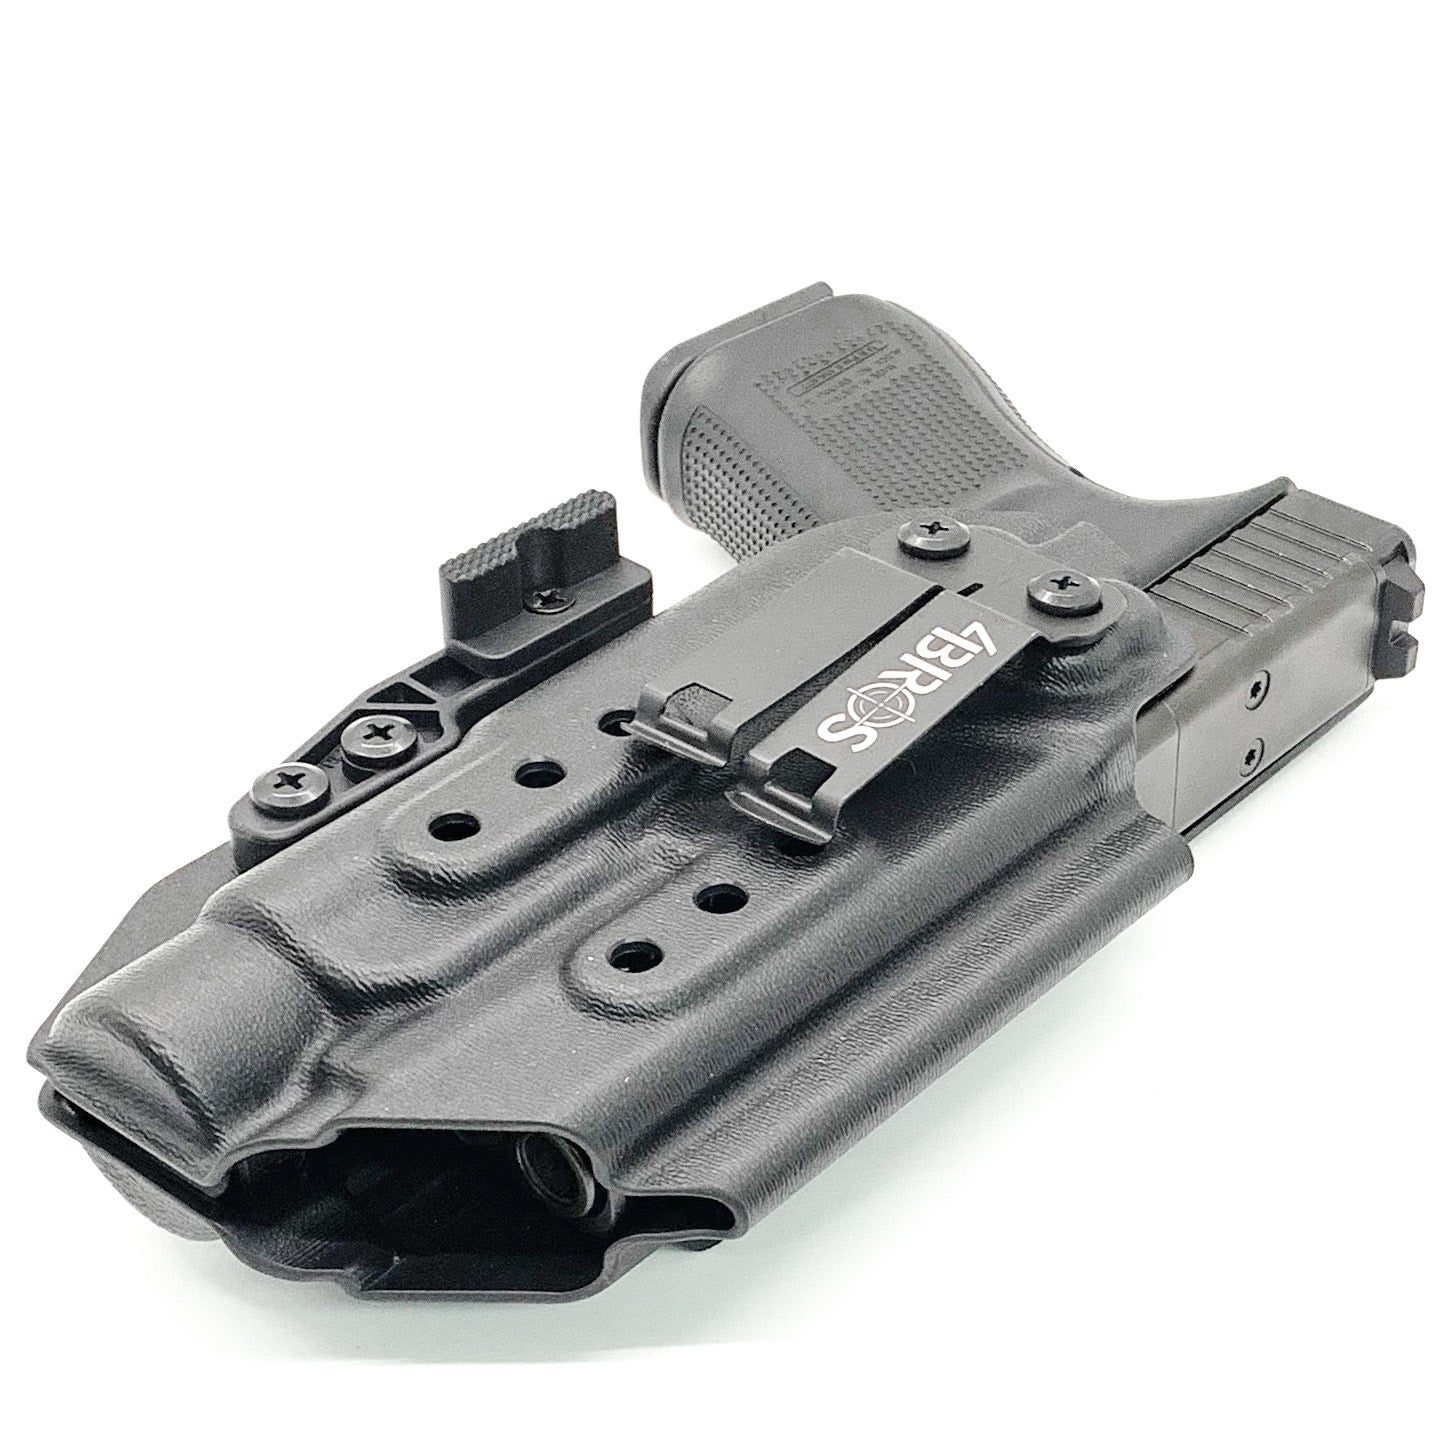 For the best Inside Waistband Taco Style Holster designed to fit the Glock 19, 19X, and 45 Gen 5 pistols with the Streamlight TLR-1 HL mounted to the pistol shop Four Brothers Holsters. Full sweat guard, adjustable retention, minimal material and smooth edges to reduce printing. Proudly made in the USA.